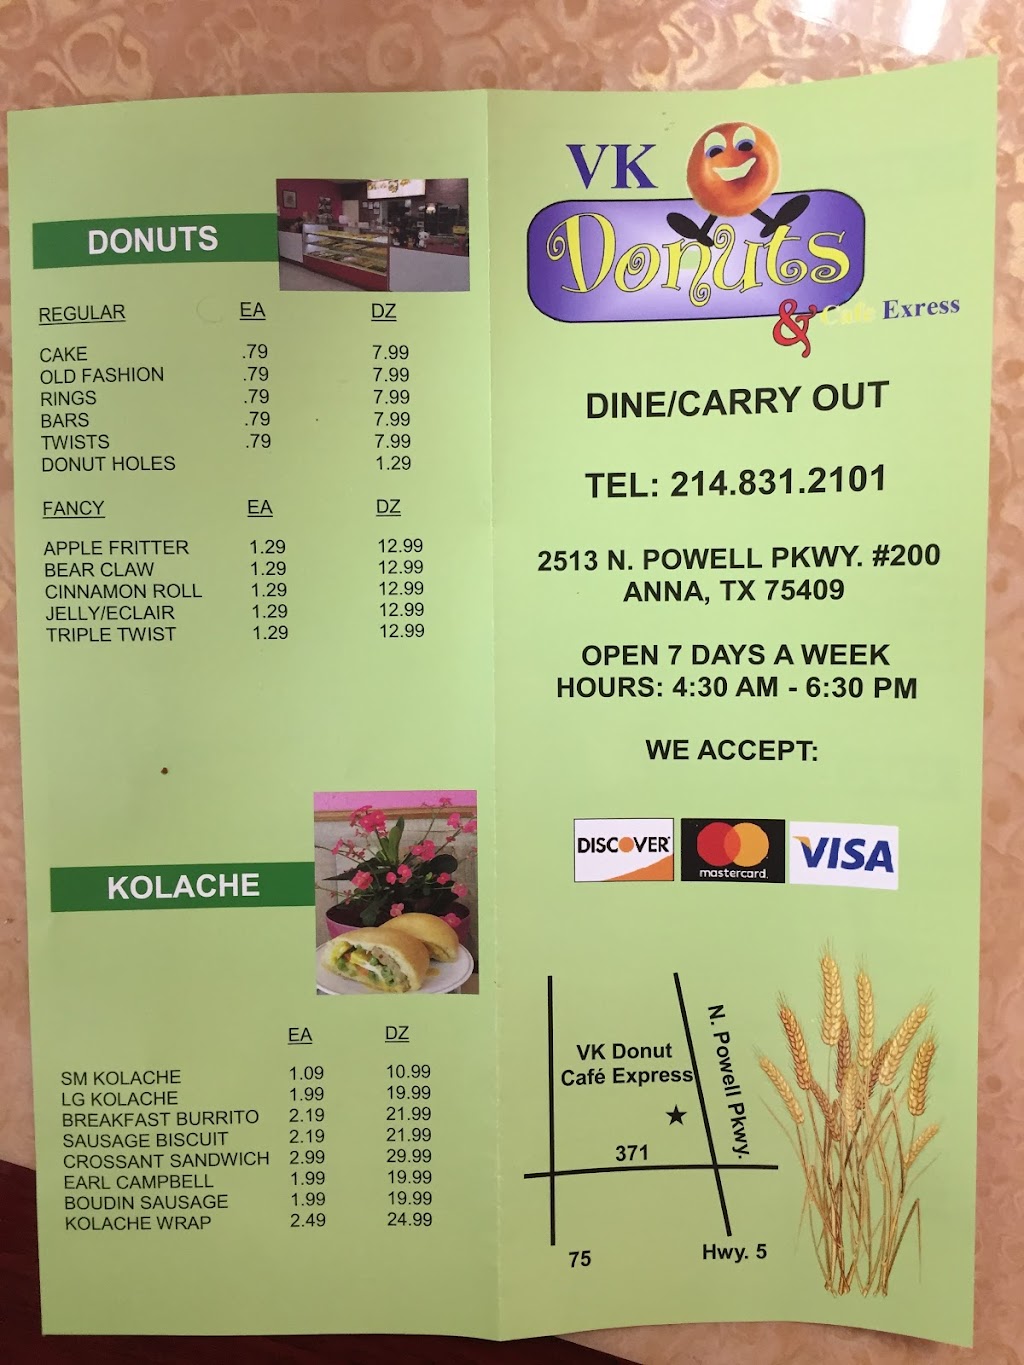 VK Donuts and Cafe Express | 2513 N Powell Pkwy #200, Anna, TX 75409, USA | Phone: (214) 831-2101